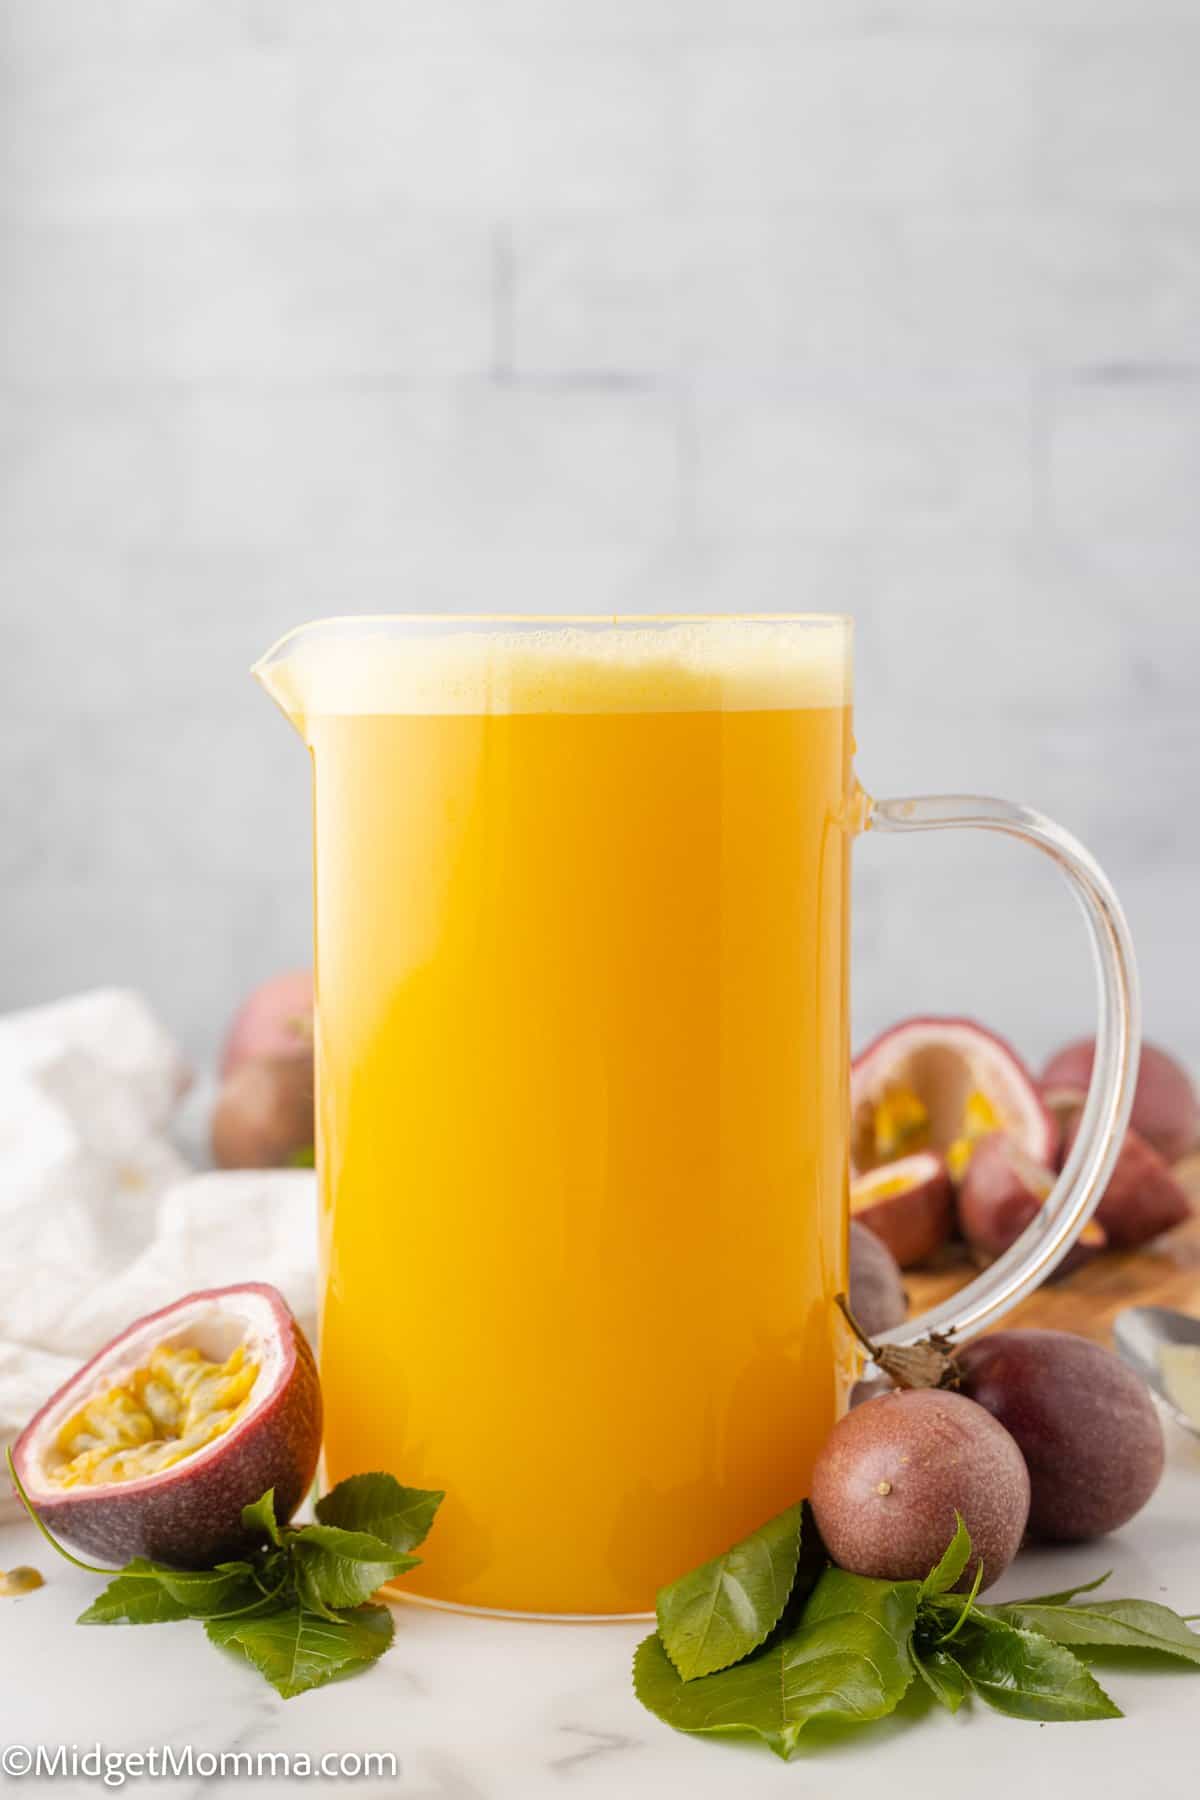 How To Make Passion Fruit Juice (Super Easy!)